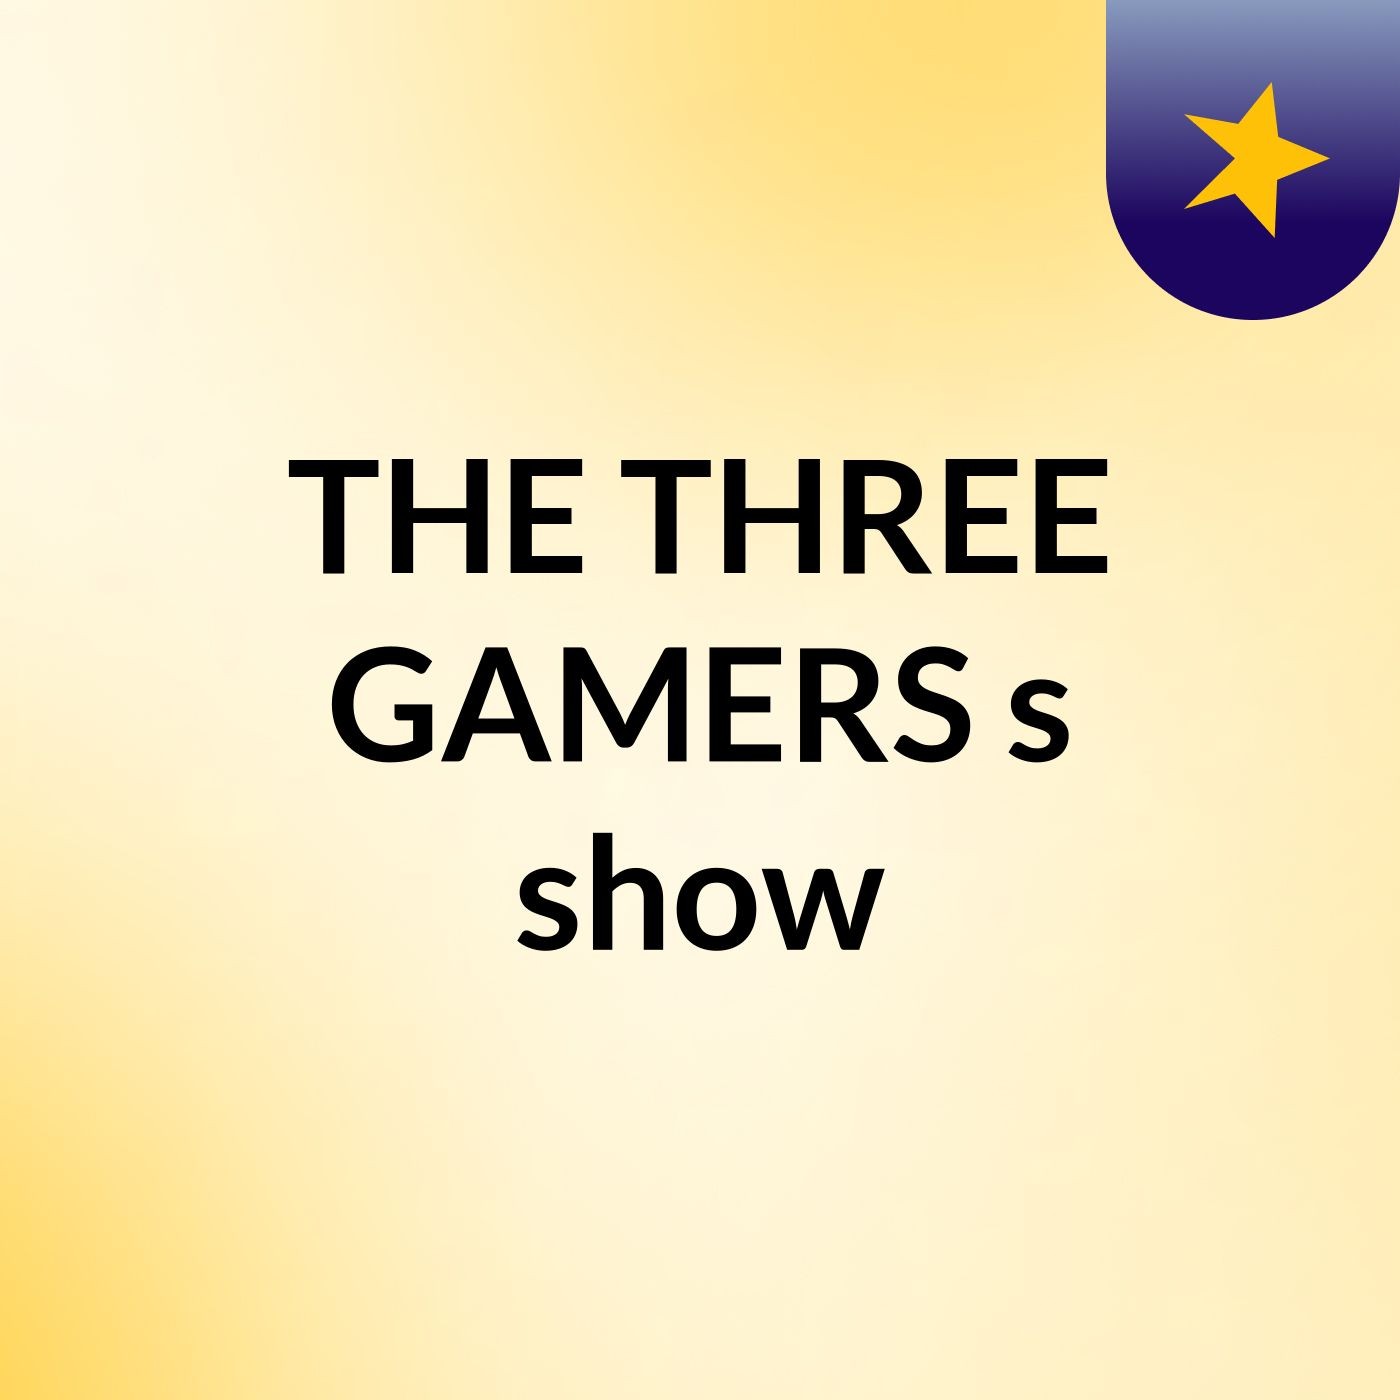 THE THREE GAMERS's show